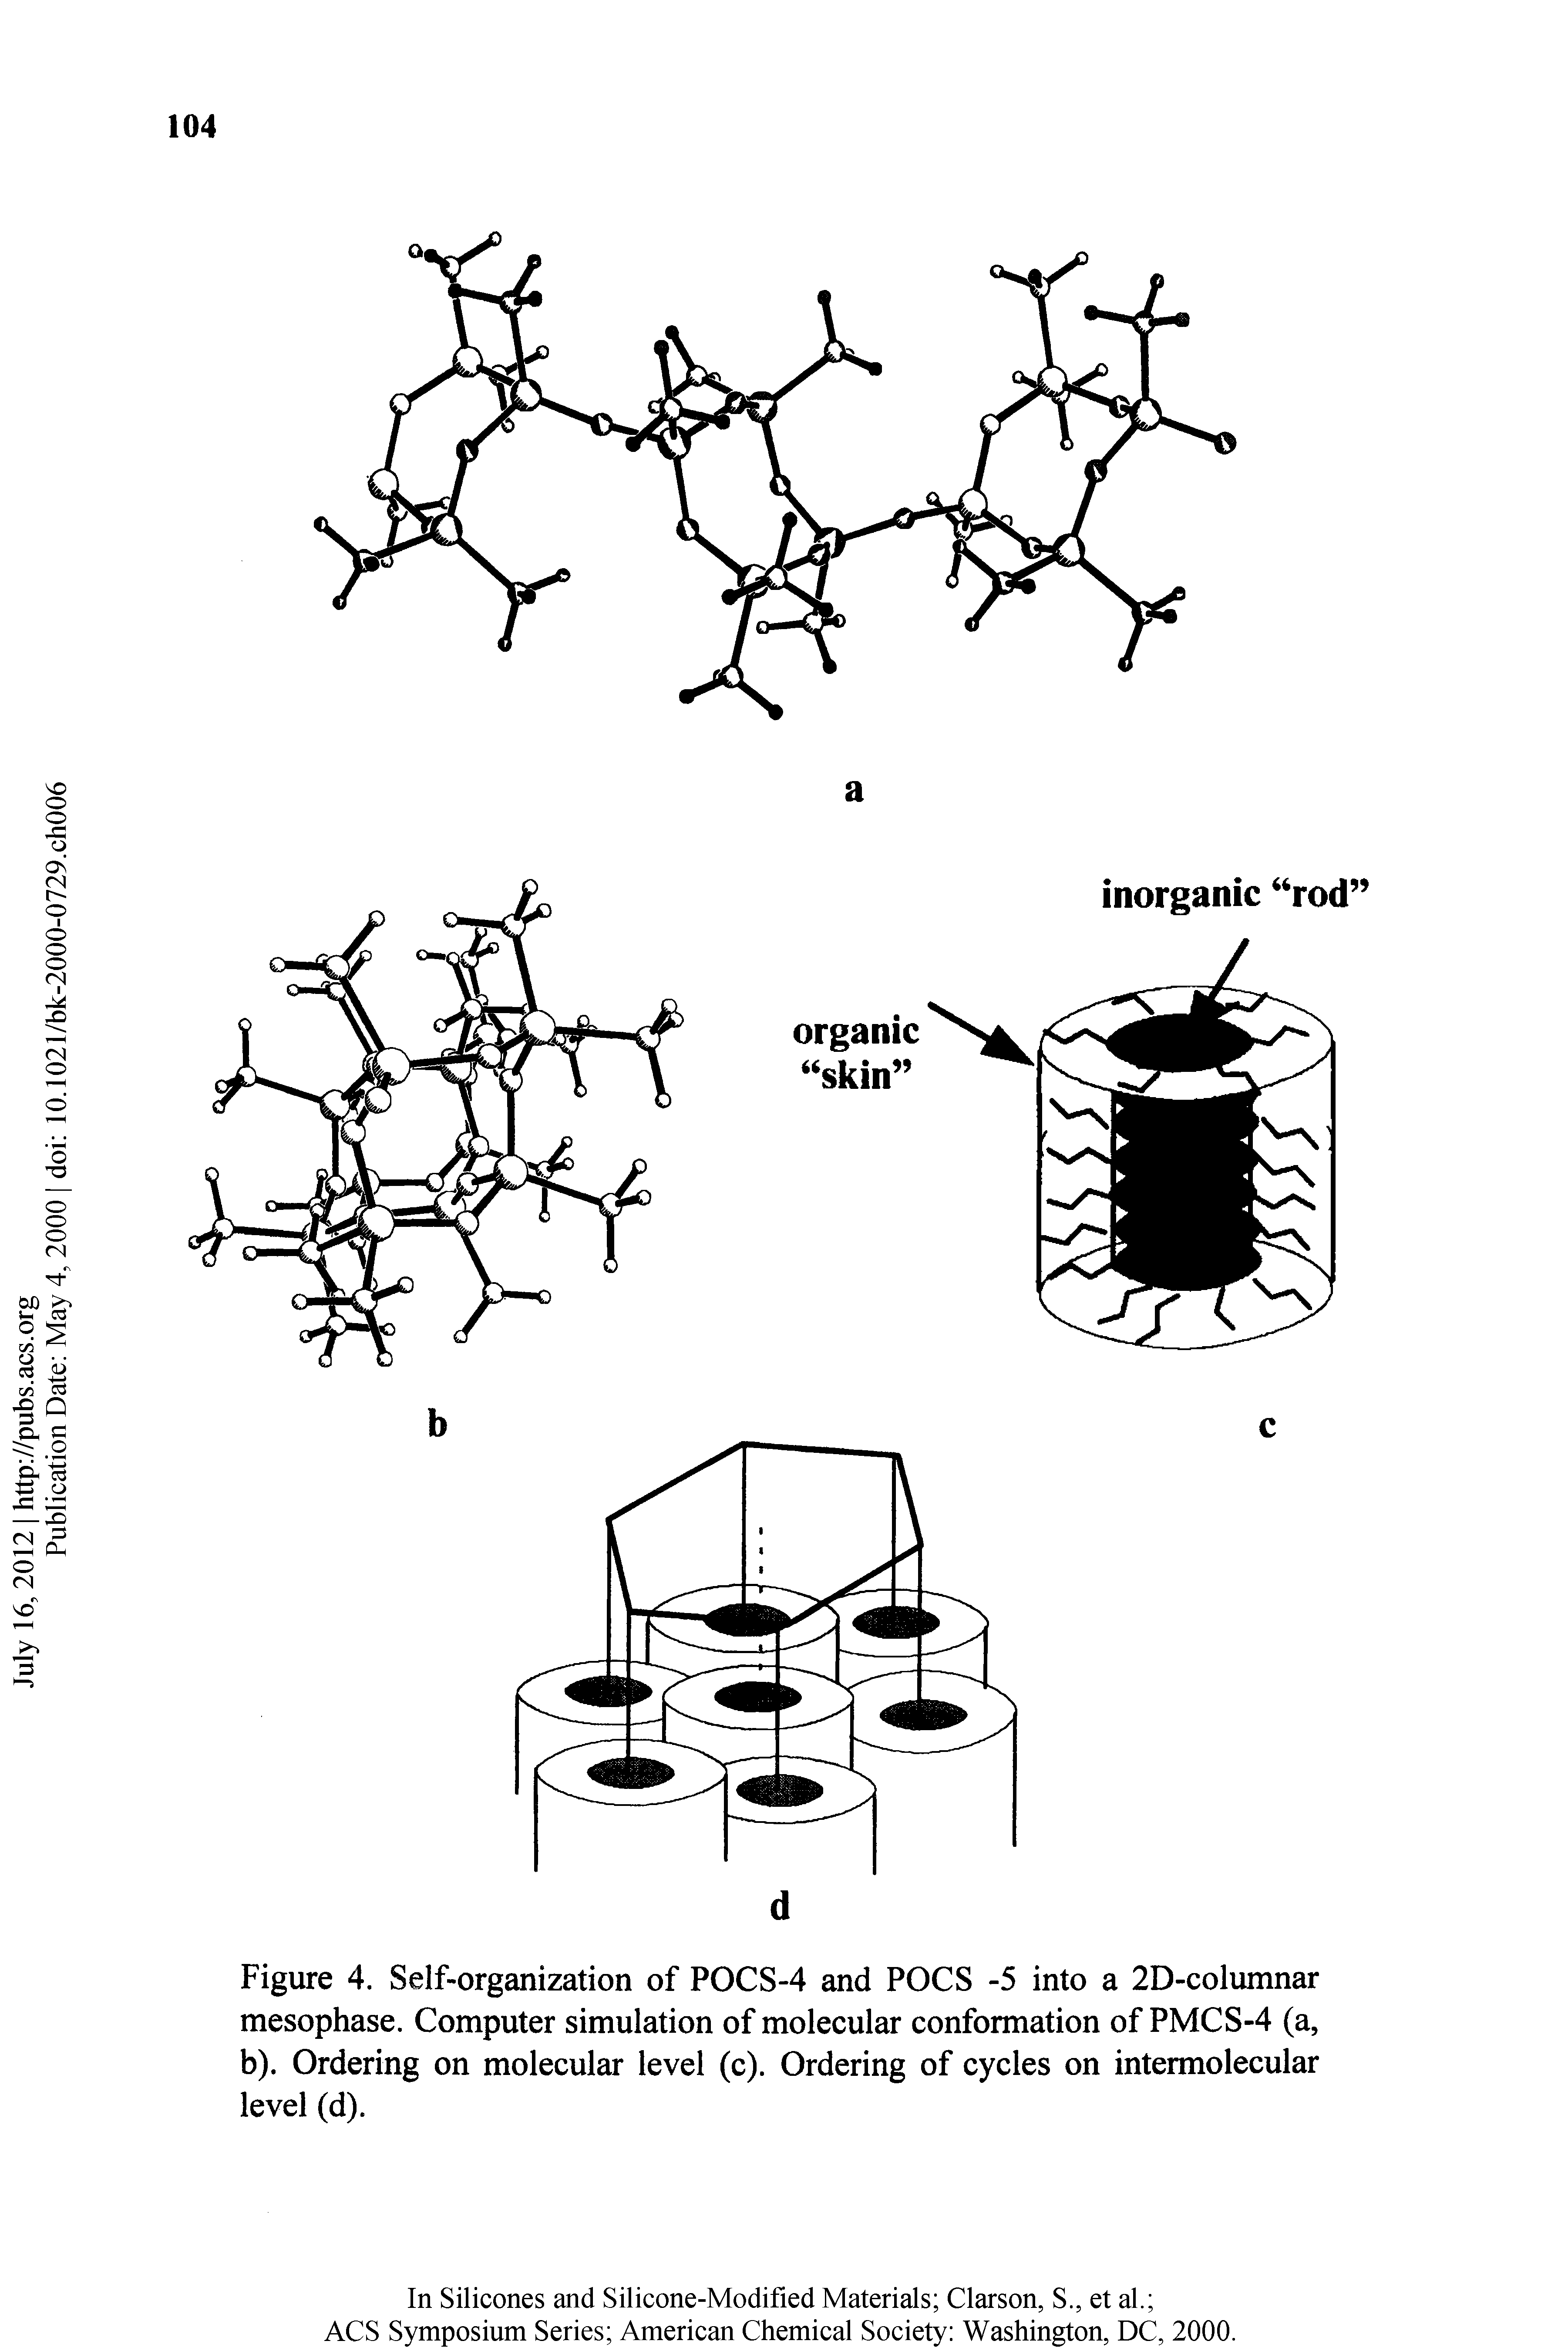 Figure 4. Self-organization of POCS-4 and POCS -5 into a 2D-columnar mesophase. Computer simulation of molecular conformation of PMCS-4 (a, b). Ordering on molecular level (c). Ordering of cycles on intermolecular level (d).